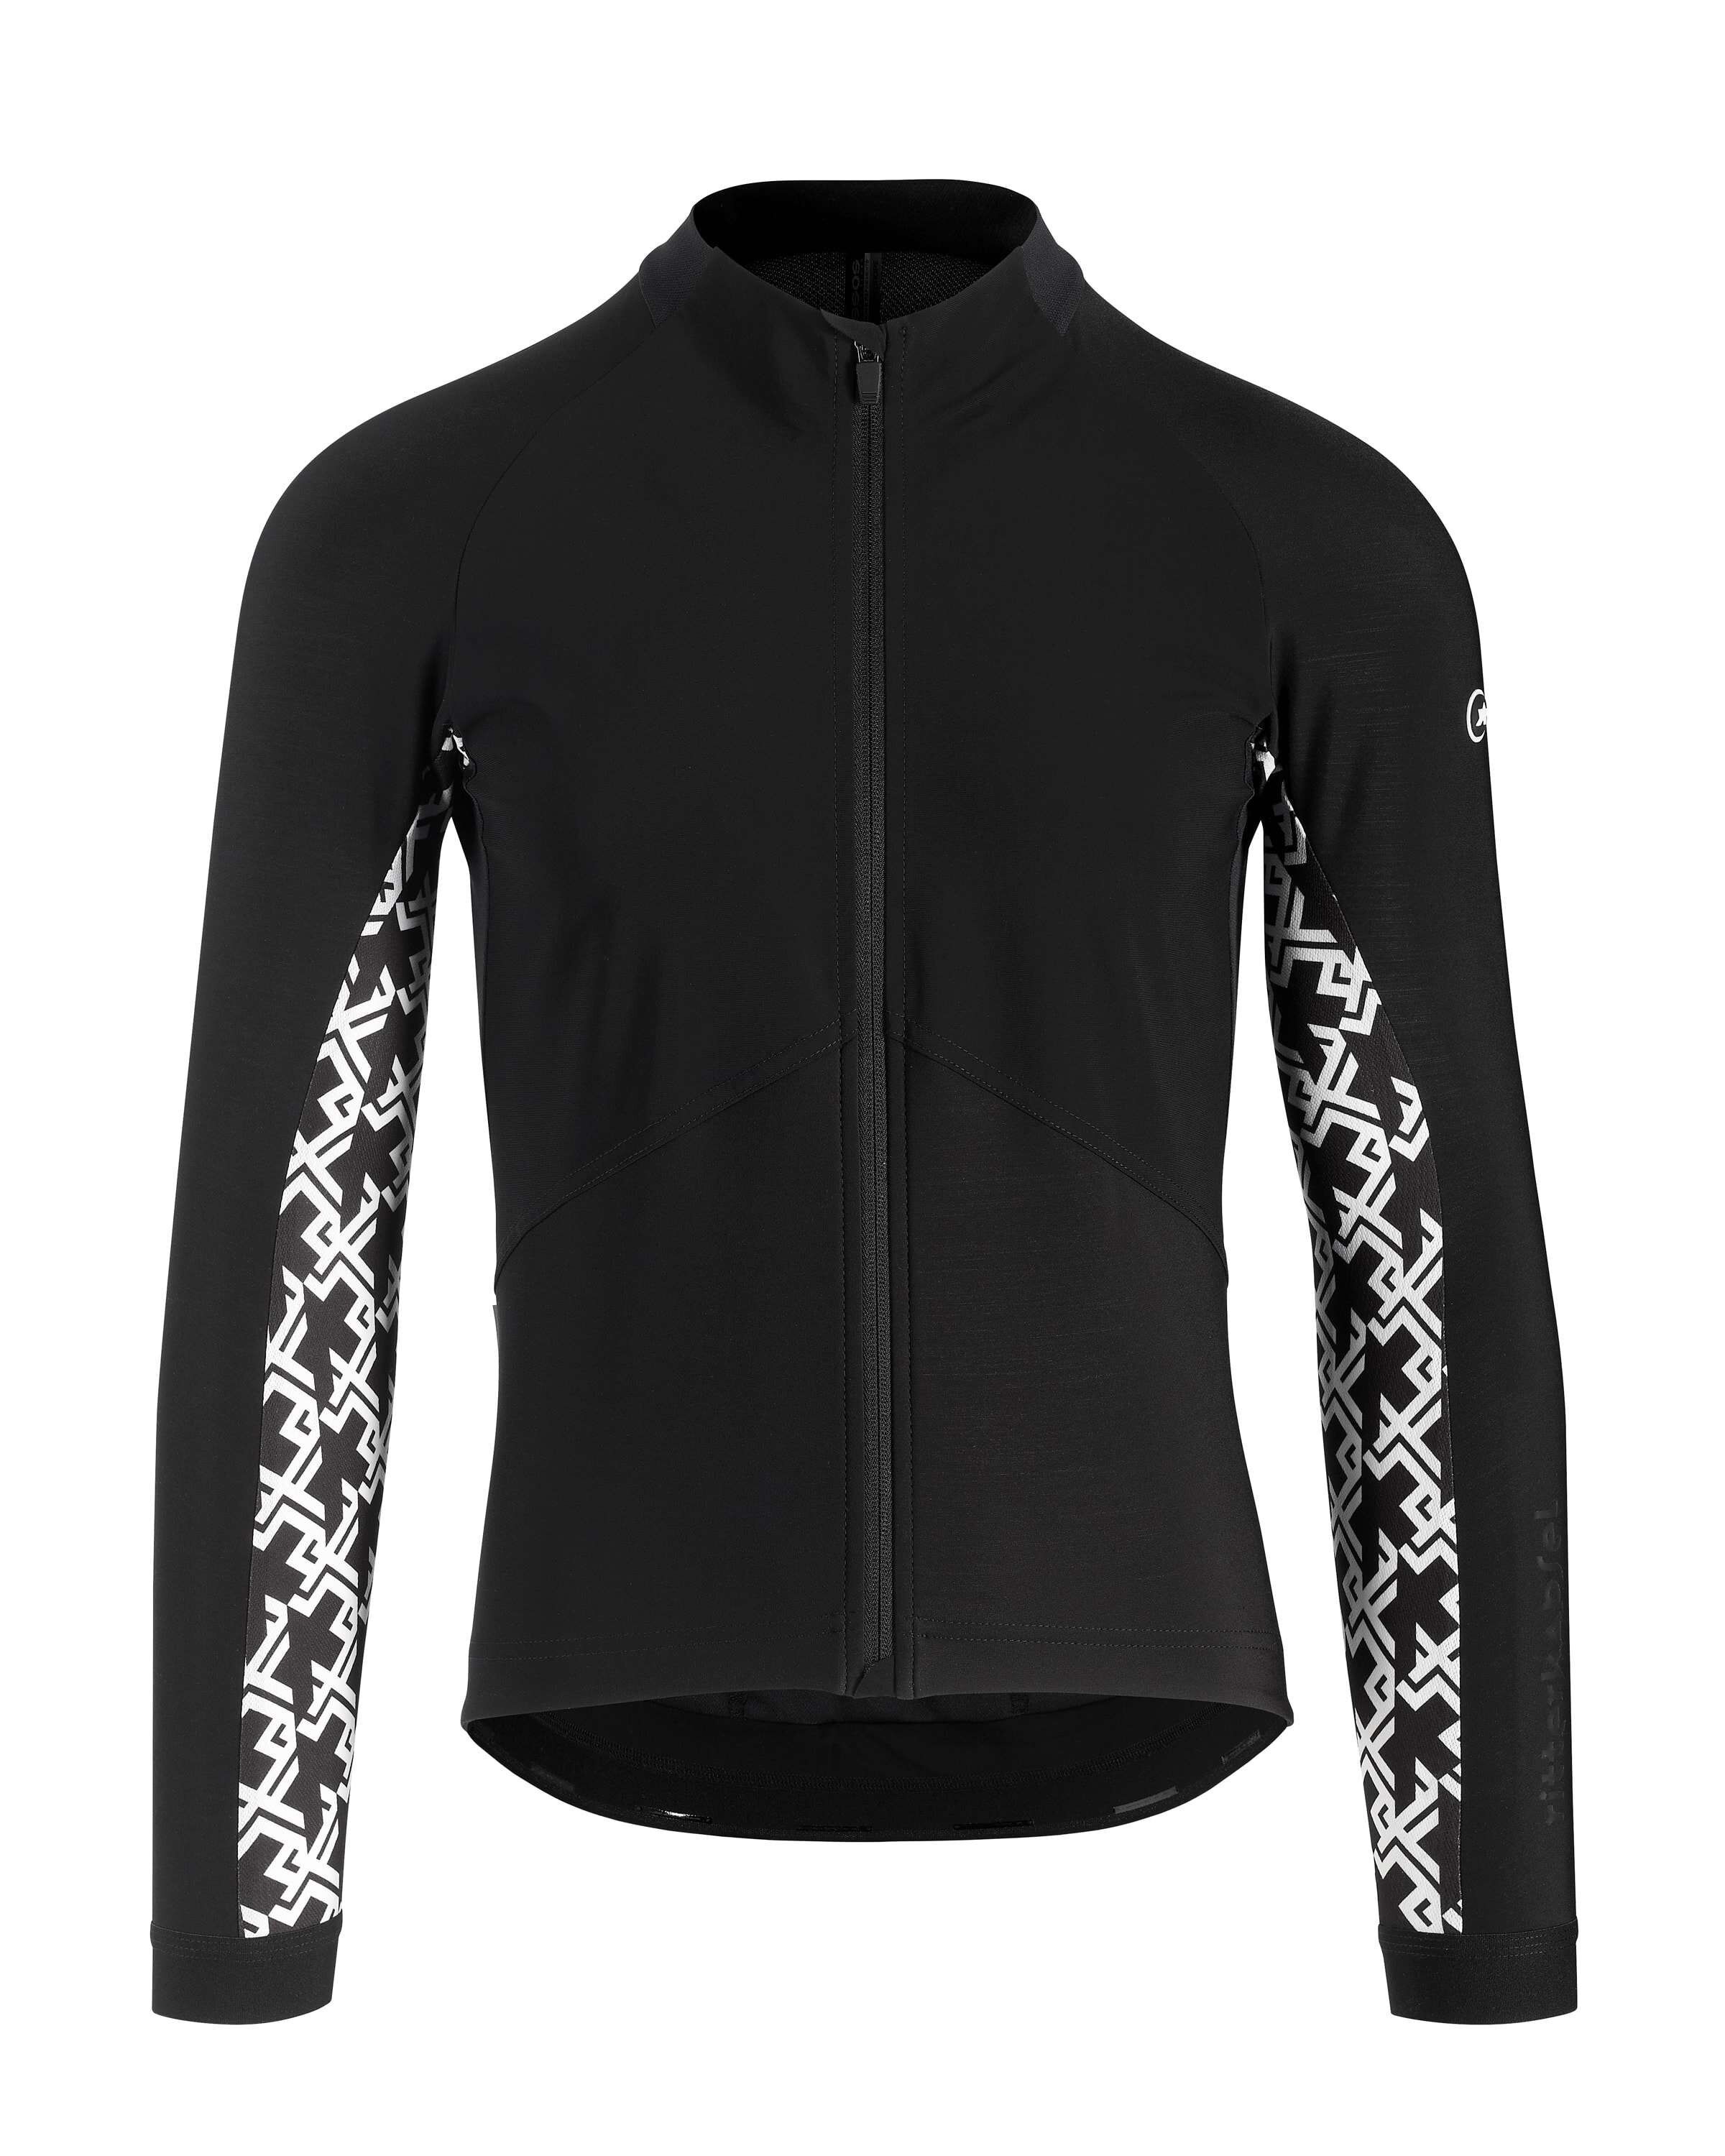 Assos Mille GT Spring Fall  Jacket  - Cycling jacket - Men's